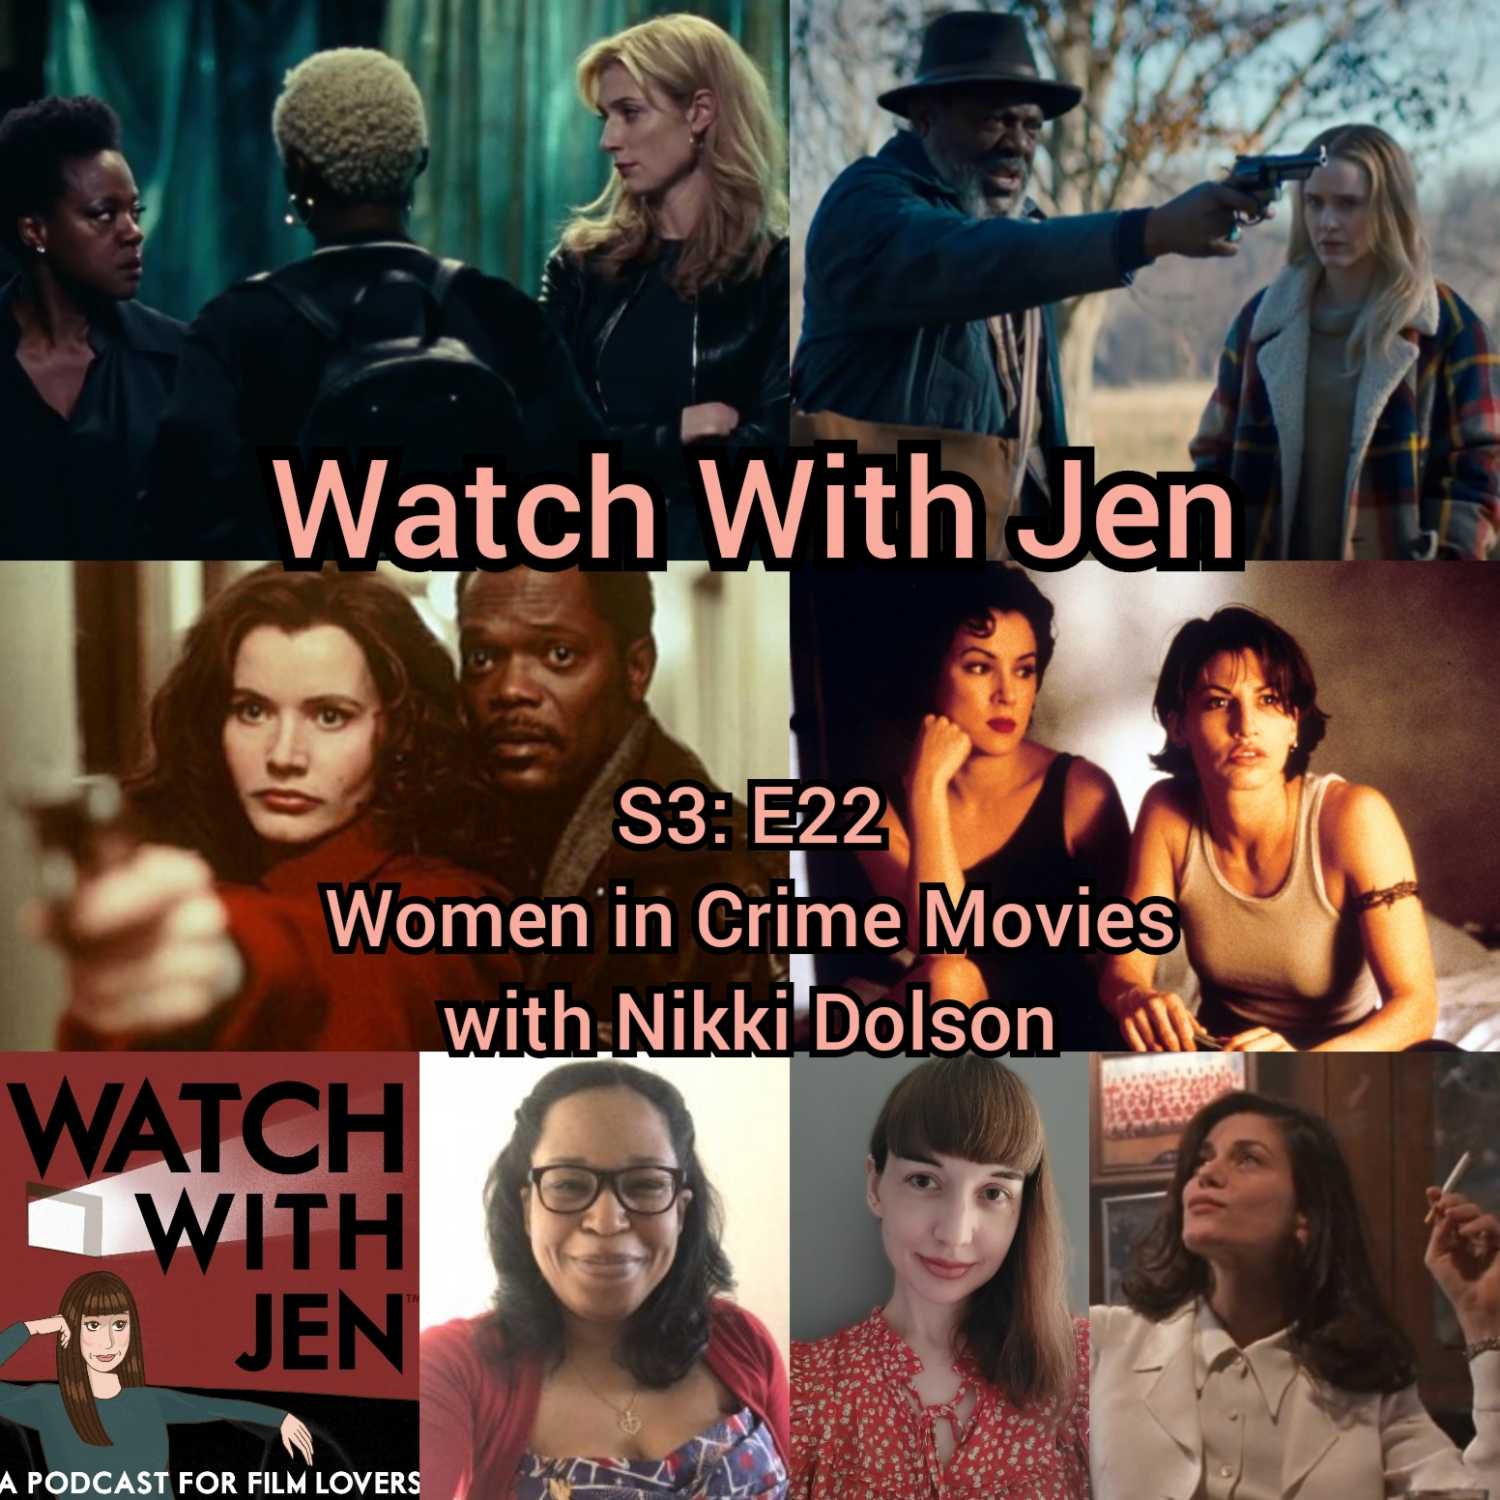 Watch With Jen - S3: E22 - Women in Crime Movies with Nikki Dolson